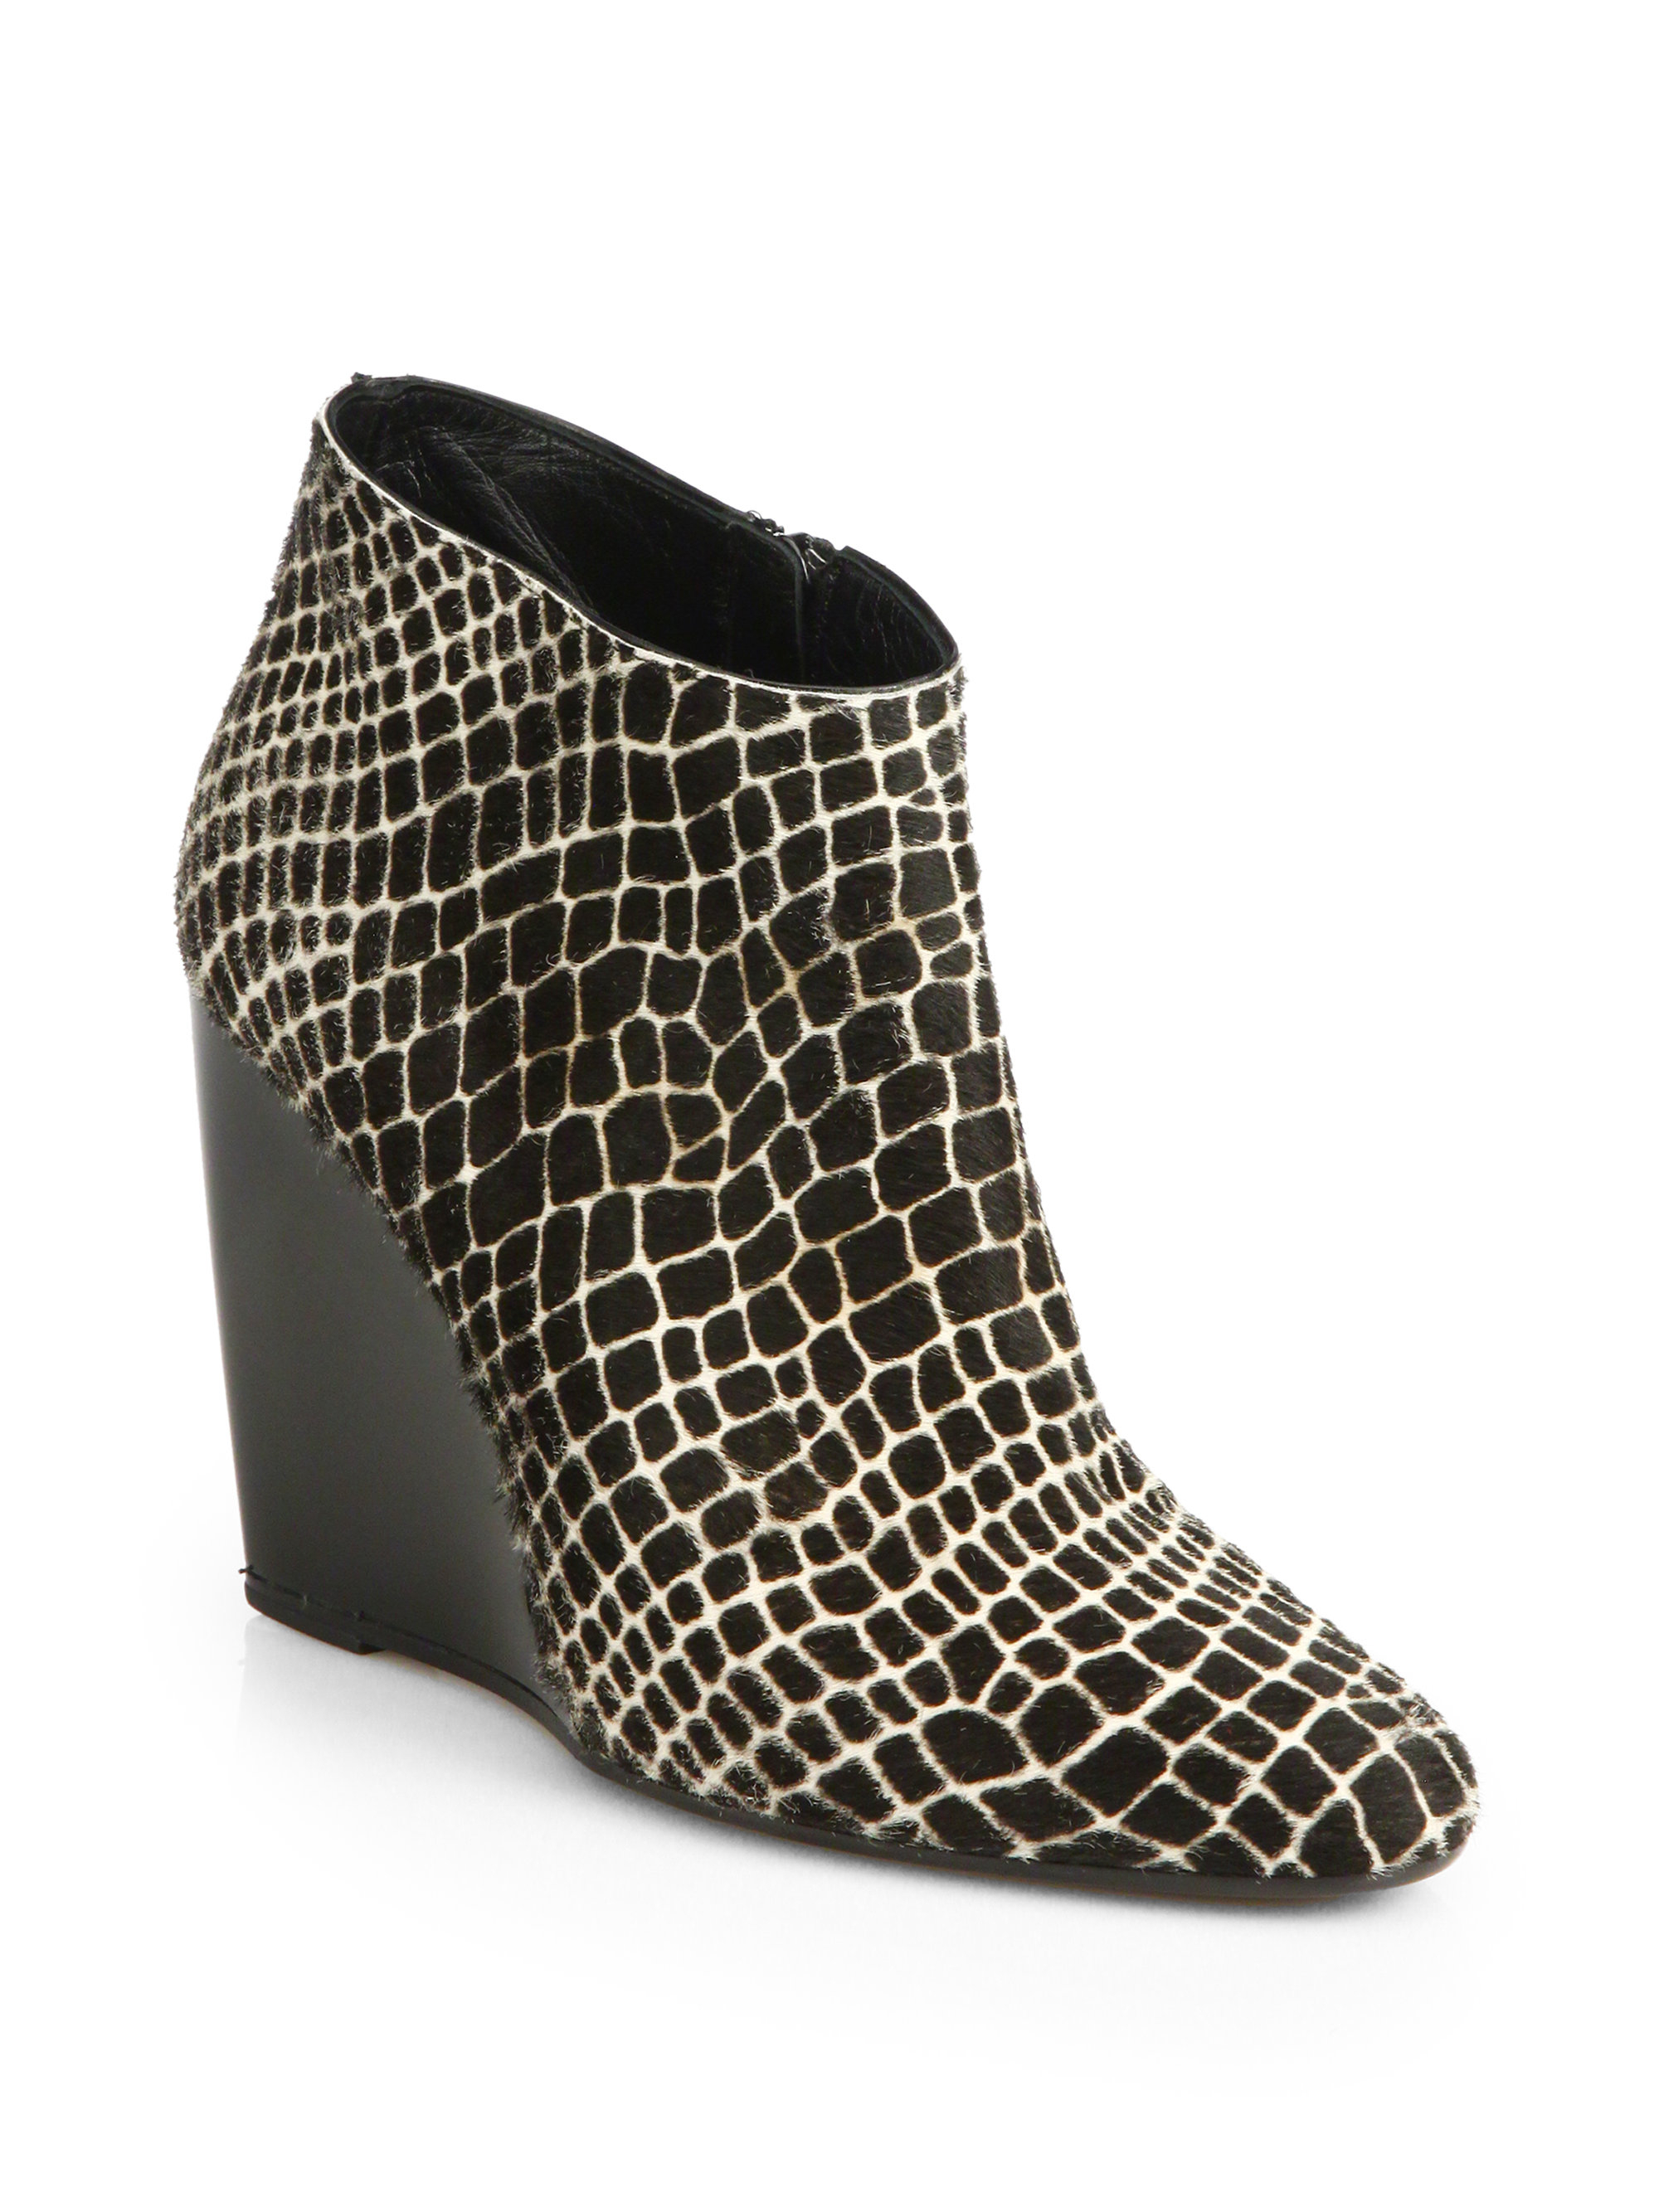 Pierre Hardy Animal-Print Calf Hair Wedge Ankle Boots in Black (BLACK ...